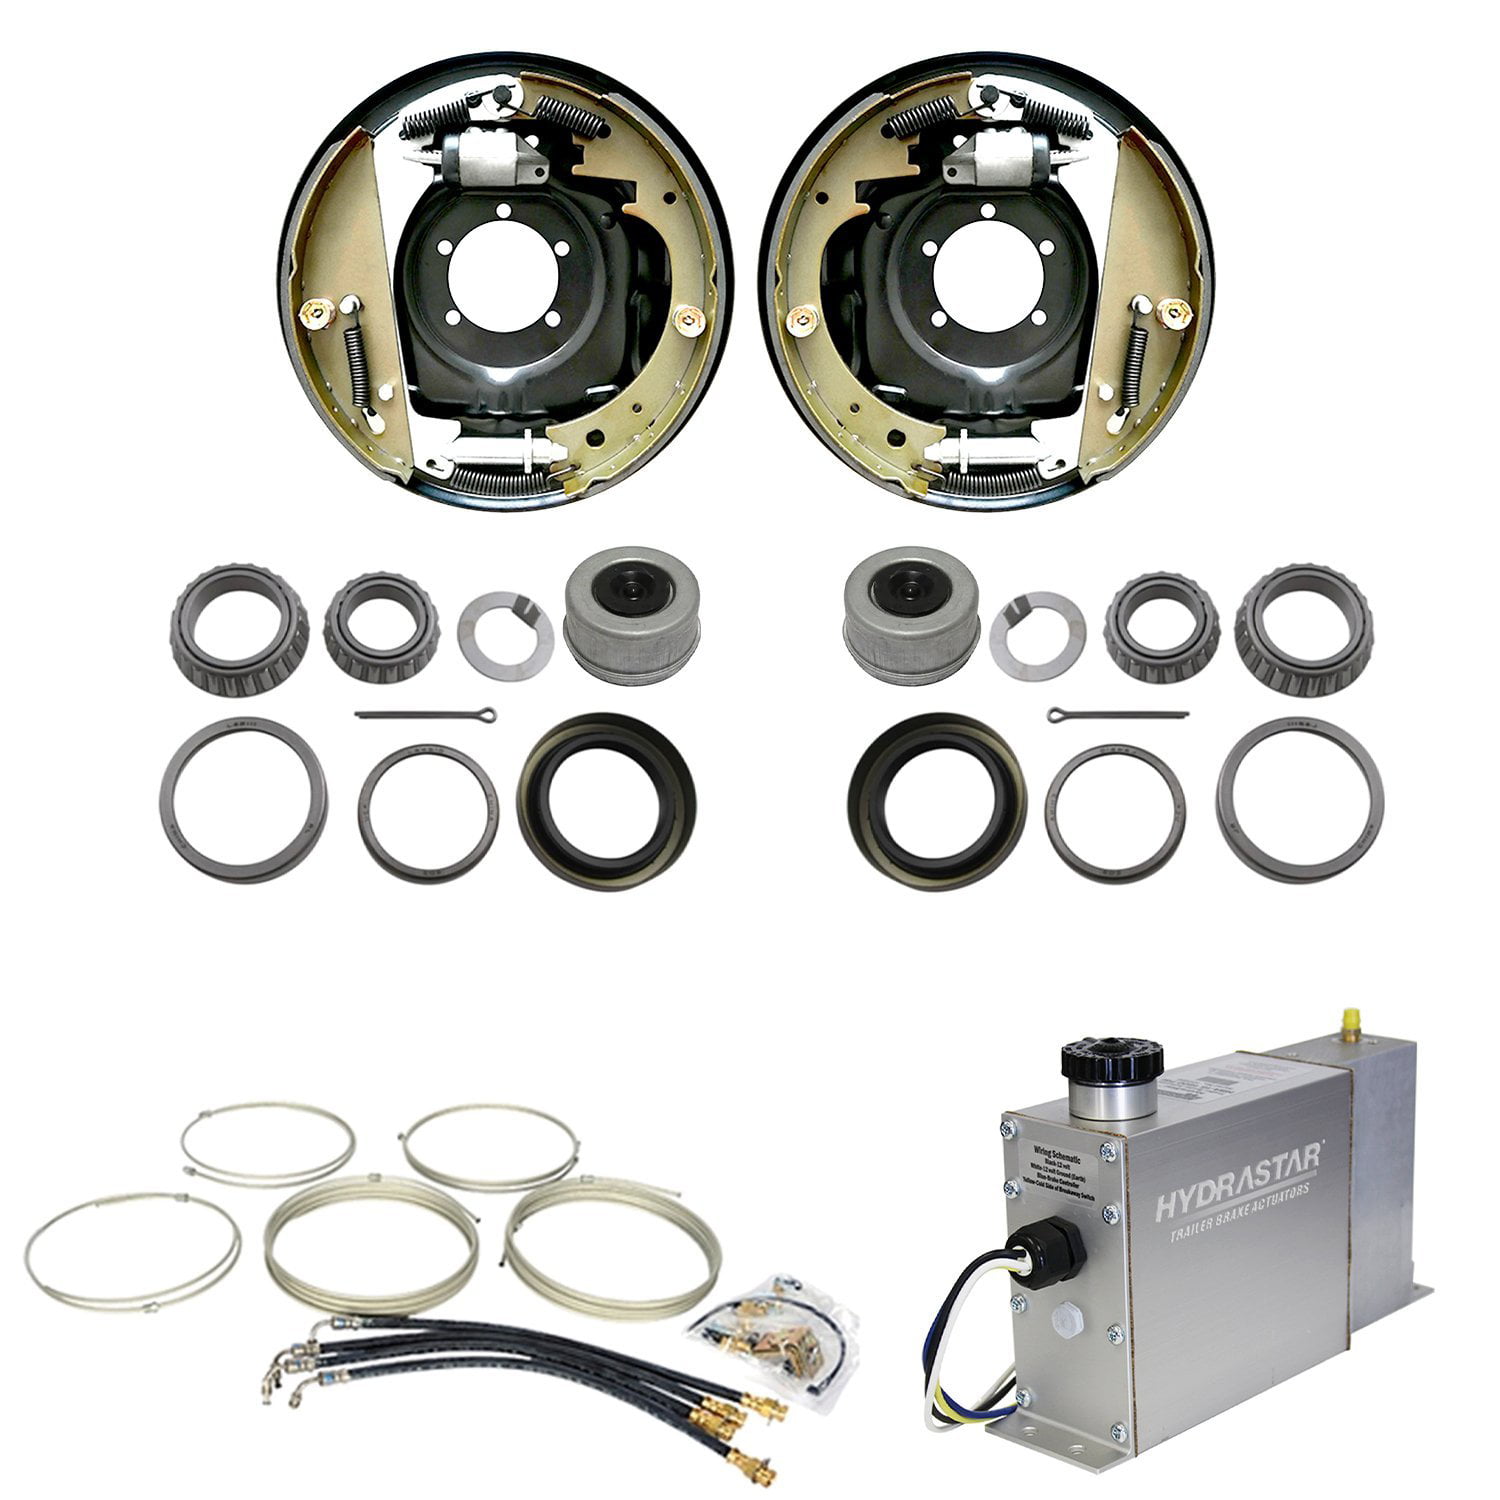 B10E-21 2 Included + 1 Right M-Parts Pair of 10 X 2-1/4 Electric Brake Assemblies Kit for 3,500 Lbs B10E-22 3.5K Trailer Axles ; 1 Left 